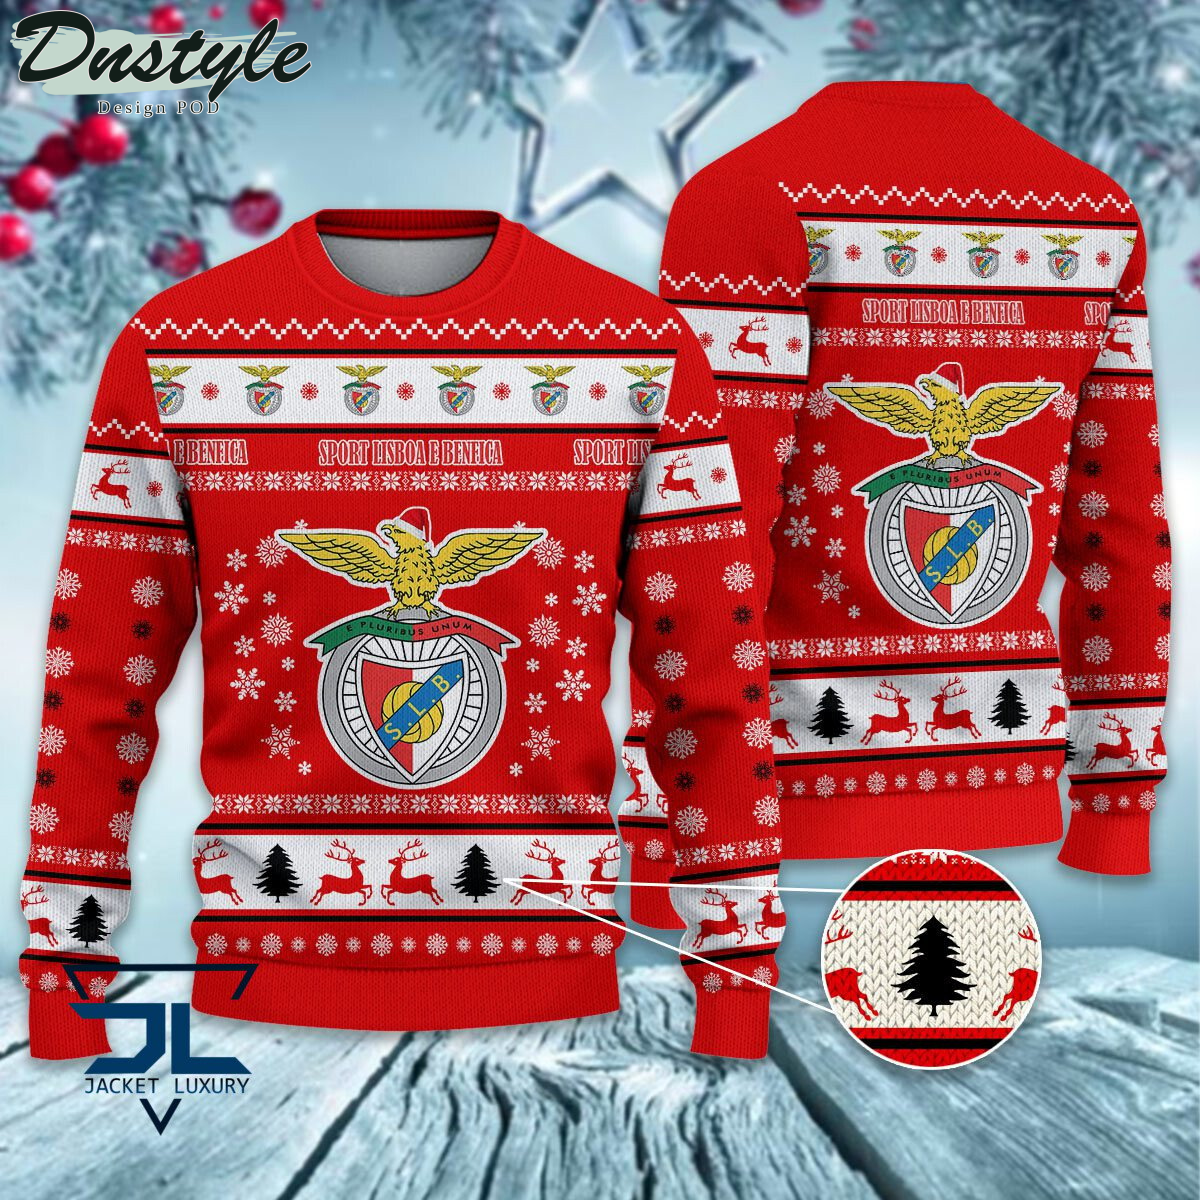 Gil Vicente Futebol Clube ugly christmas sweater